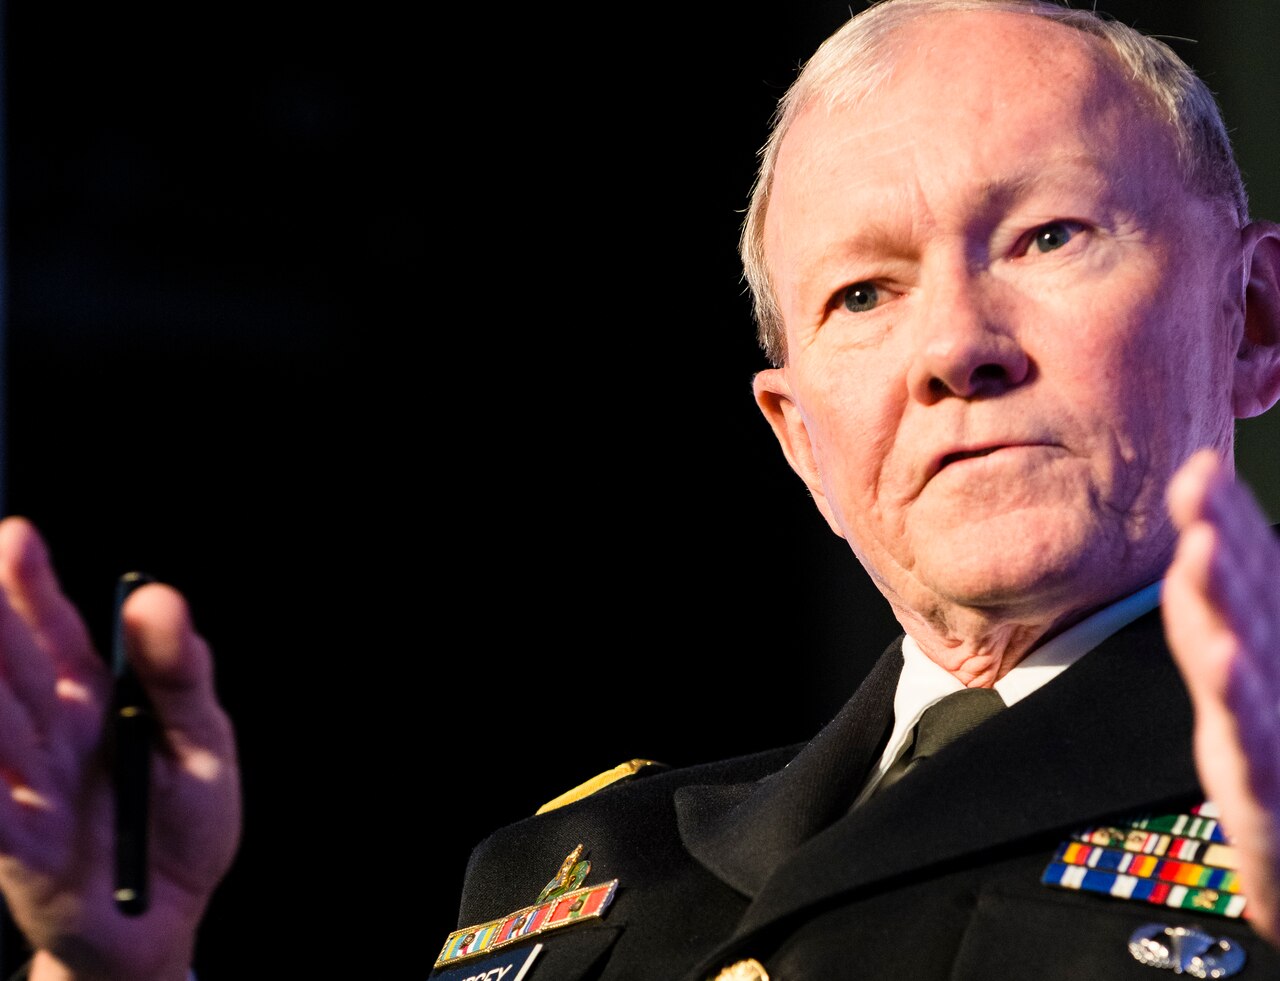 Army Gen. Martin E. Dempsey, chairman of the Joint Chiefs of Staff, addresses the Aspen Security Forum in Aspen, Colo., July 24, 2014. DoD photo by Army Staff Sgt. Sean K. Harp